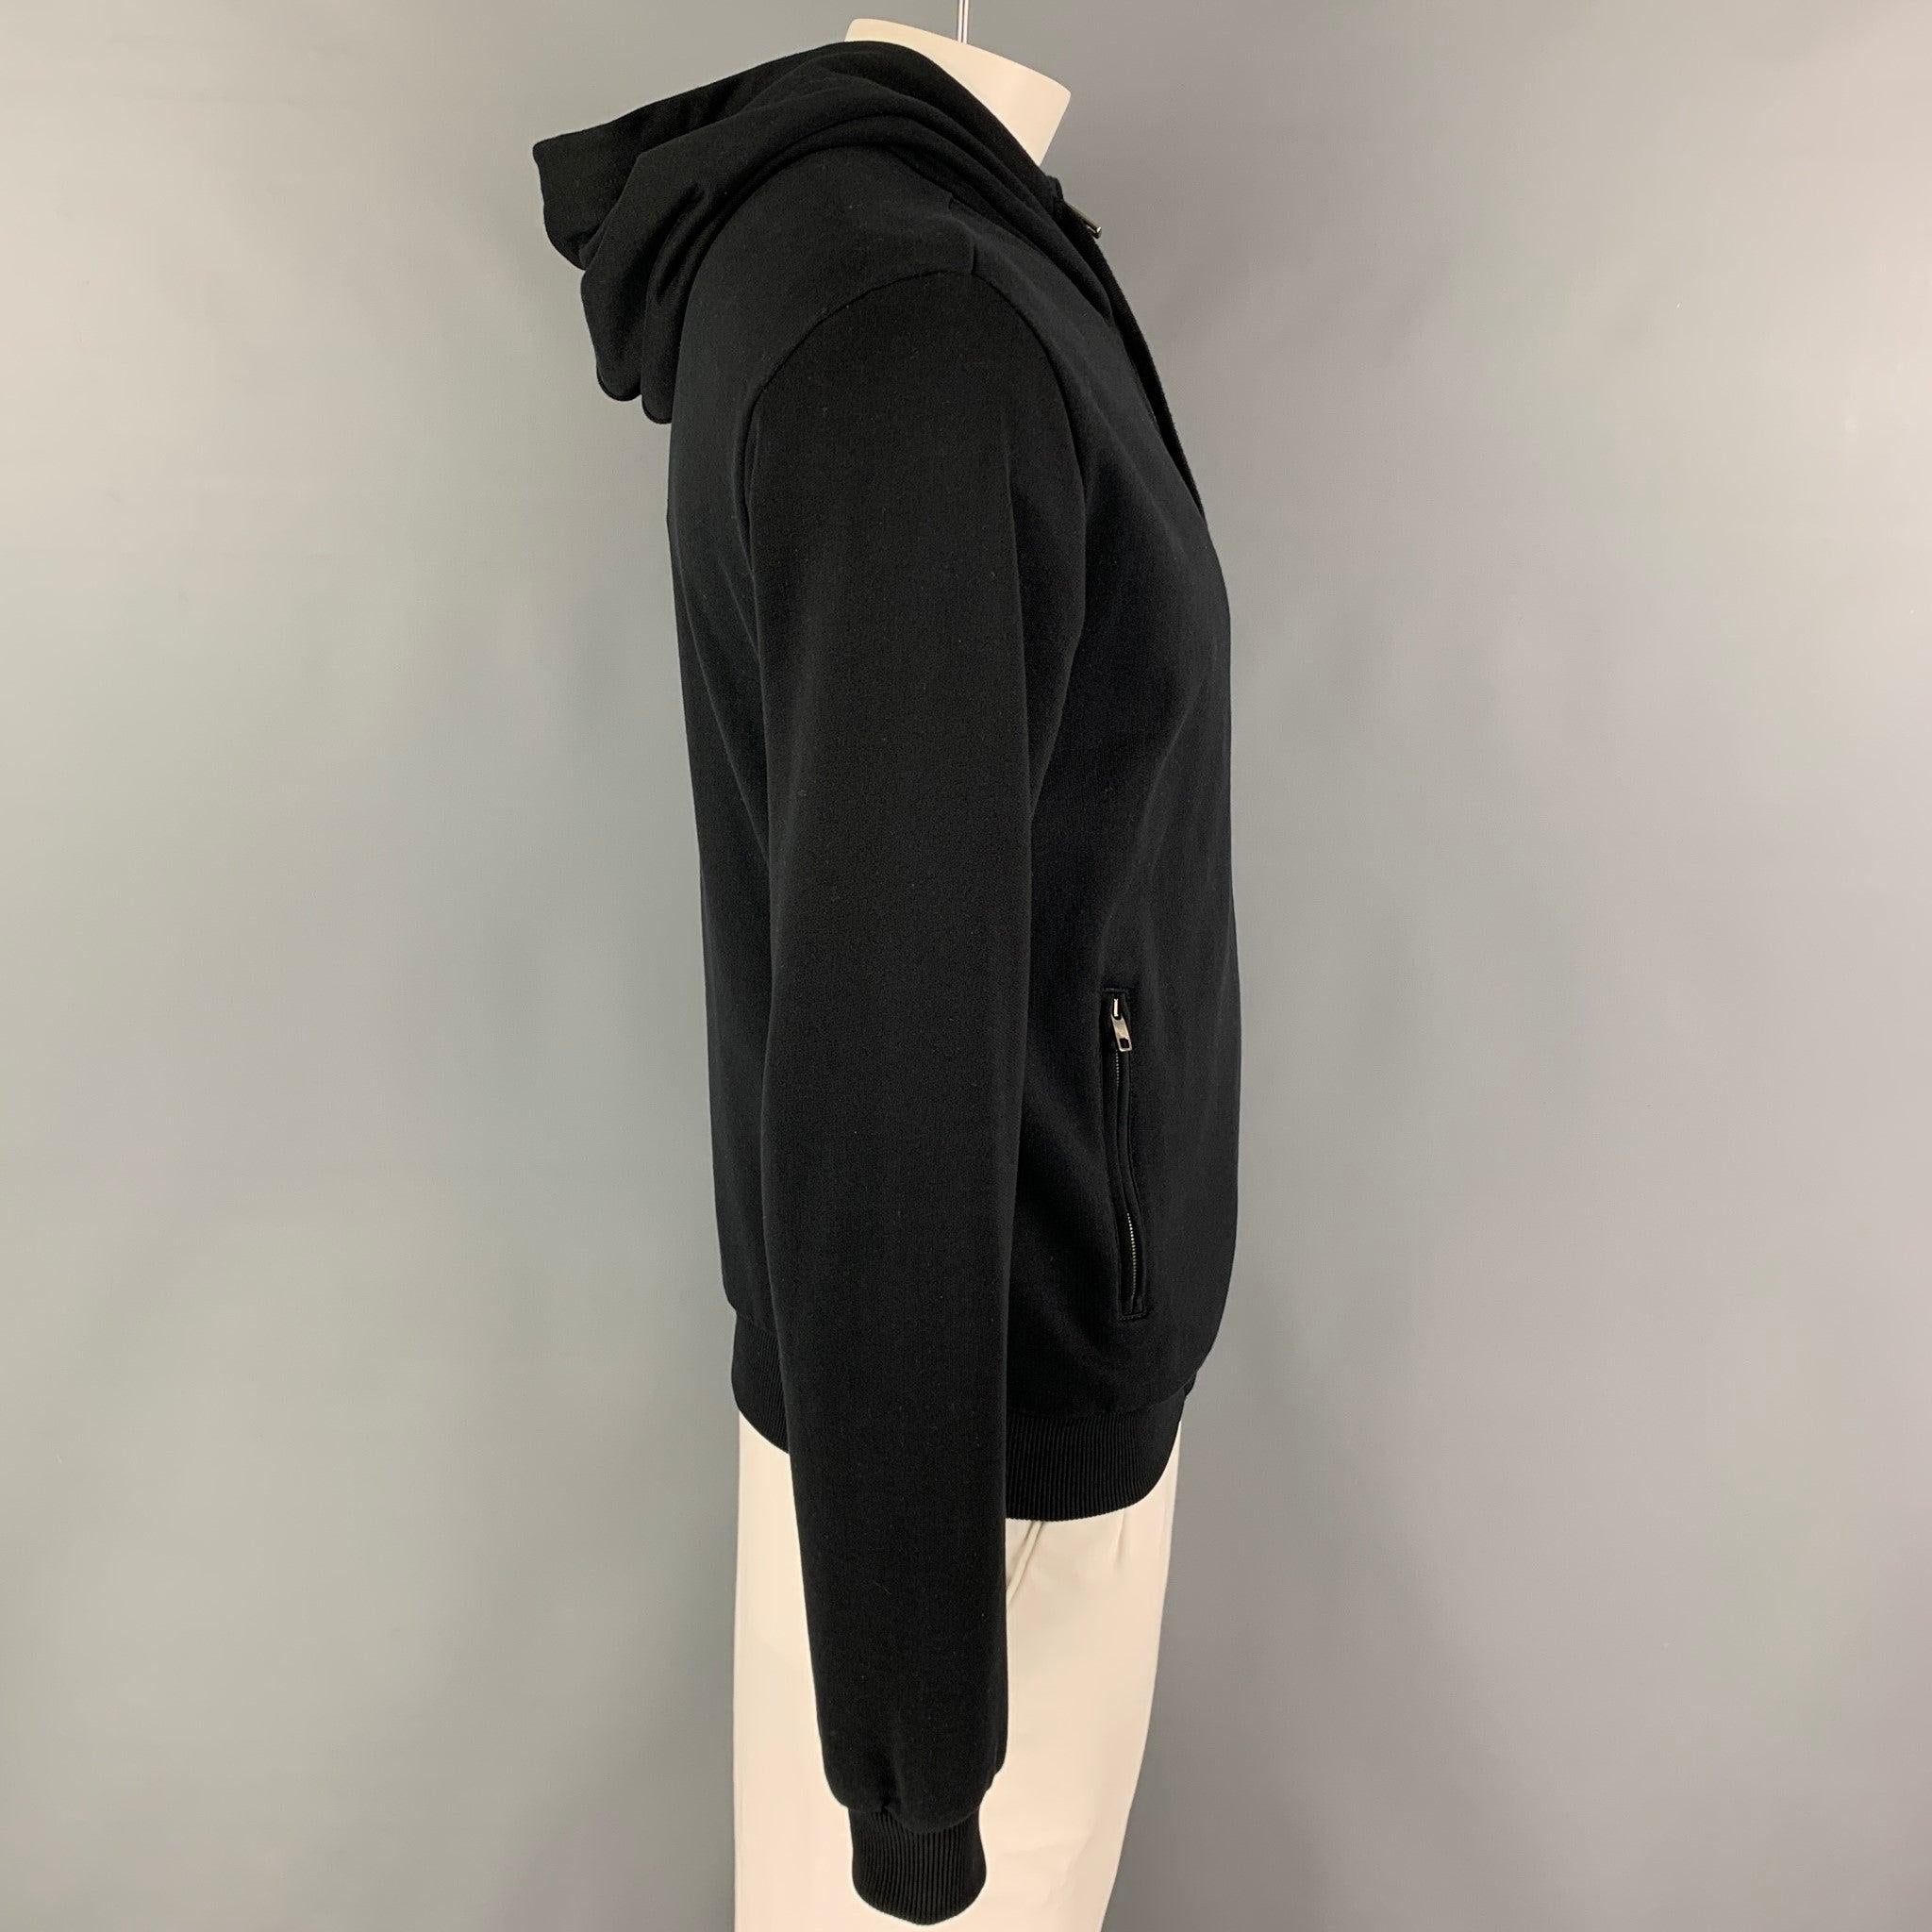 DOLCE & GABBANA jacket comes in a black cotton featuring a embroidered logo, hooded, zipper pockets, and a full zip up closure. Made in Italy.Excellent
Pre-Owned Condition. 

Marked:   50 

Measurements: 
 
Shoulder: 19.5 inches Chest: 42 inches